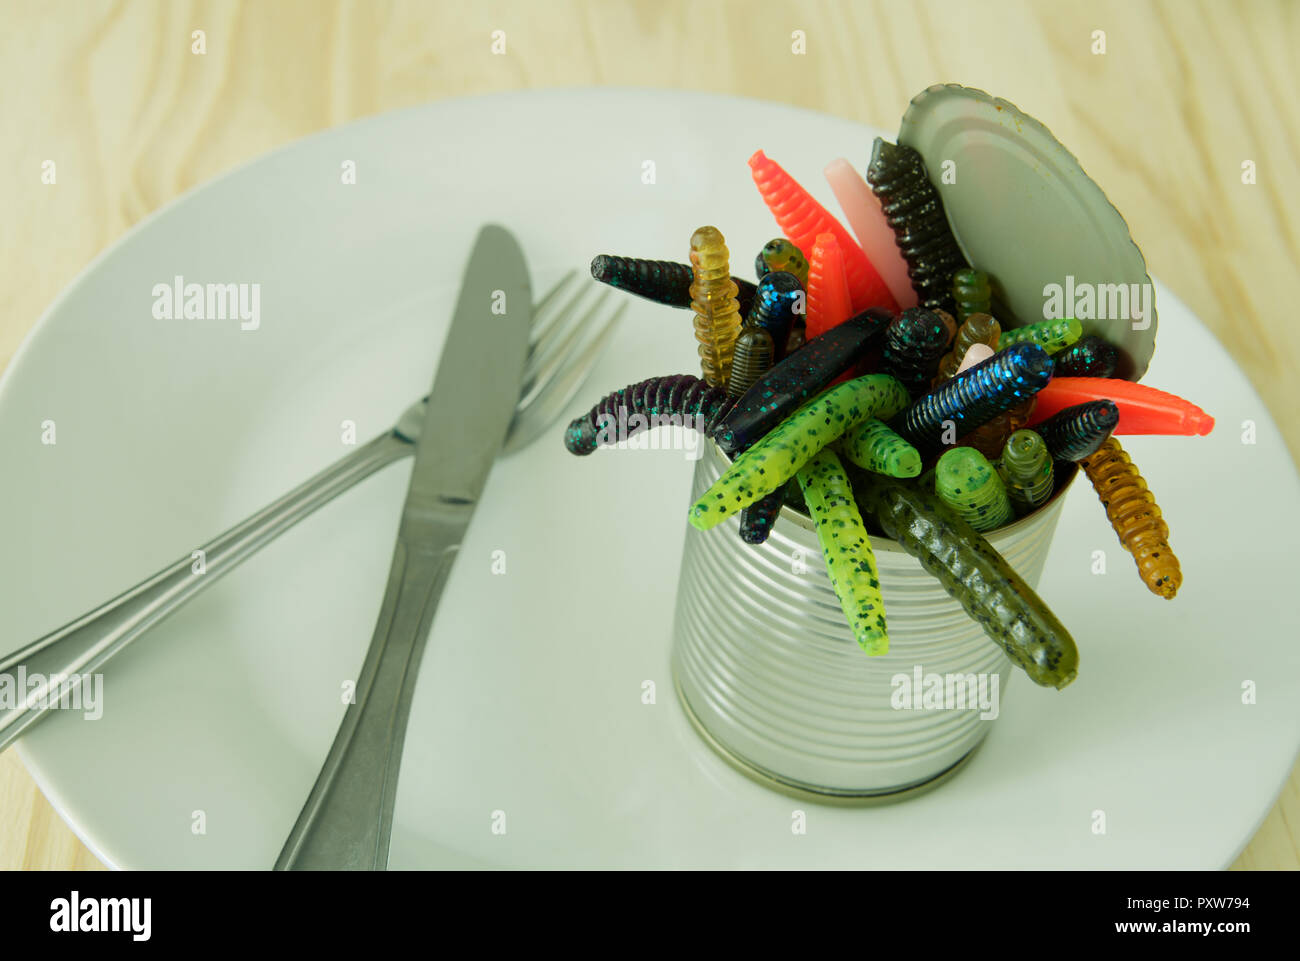 Life situation of colourful weird artificial worms crawling out of tin can on food plate with knife and fork Stock Photo